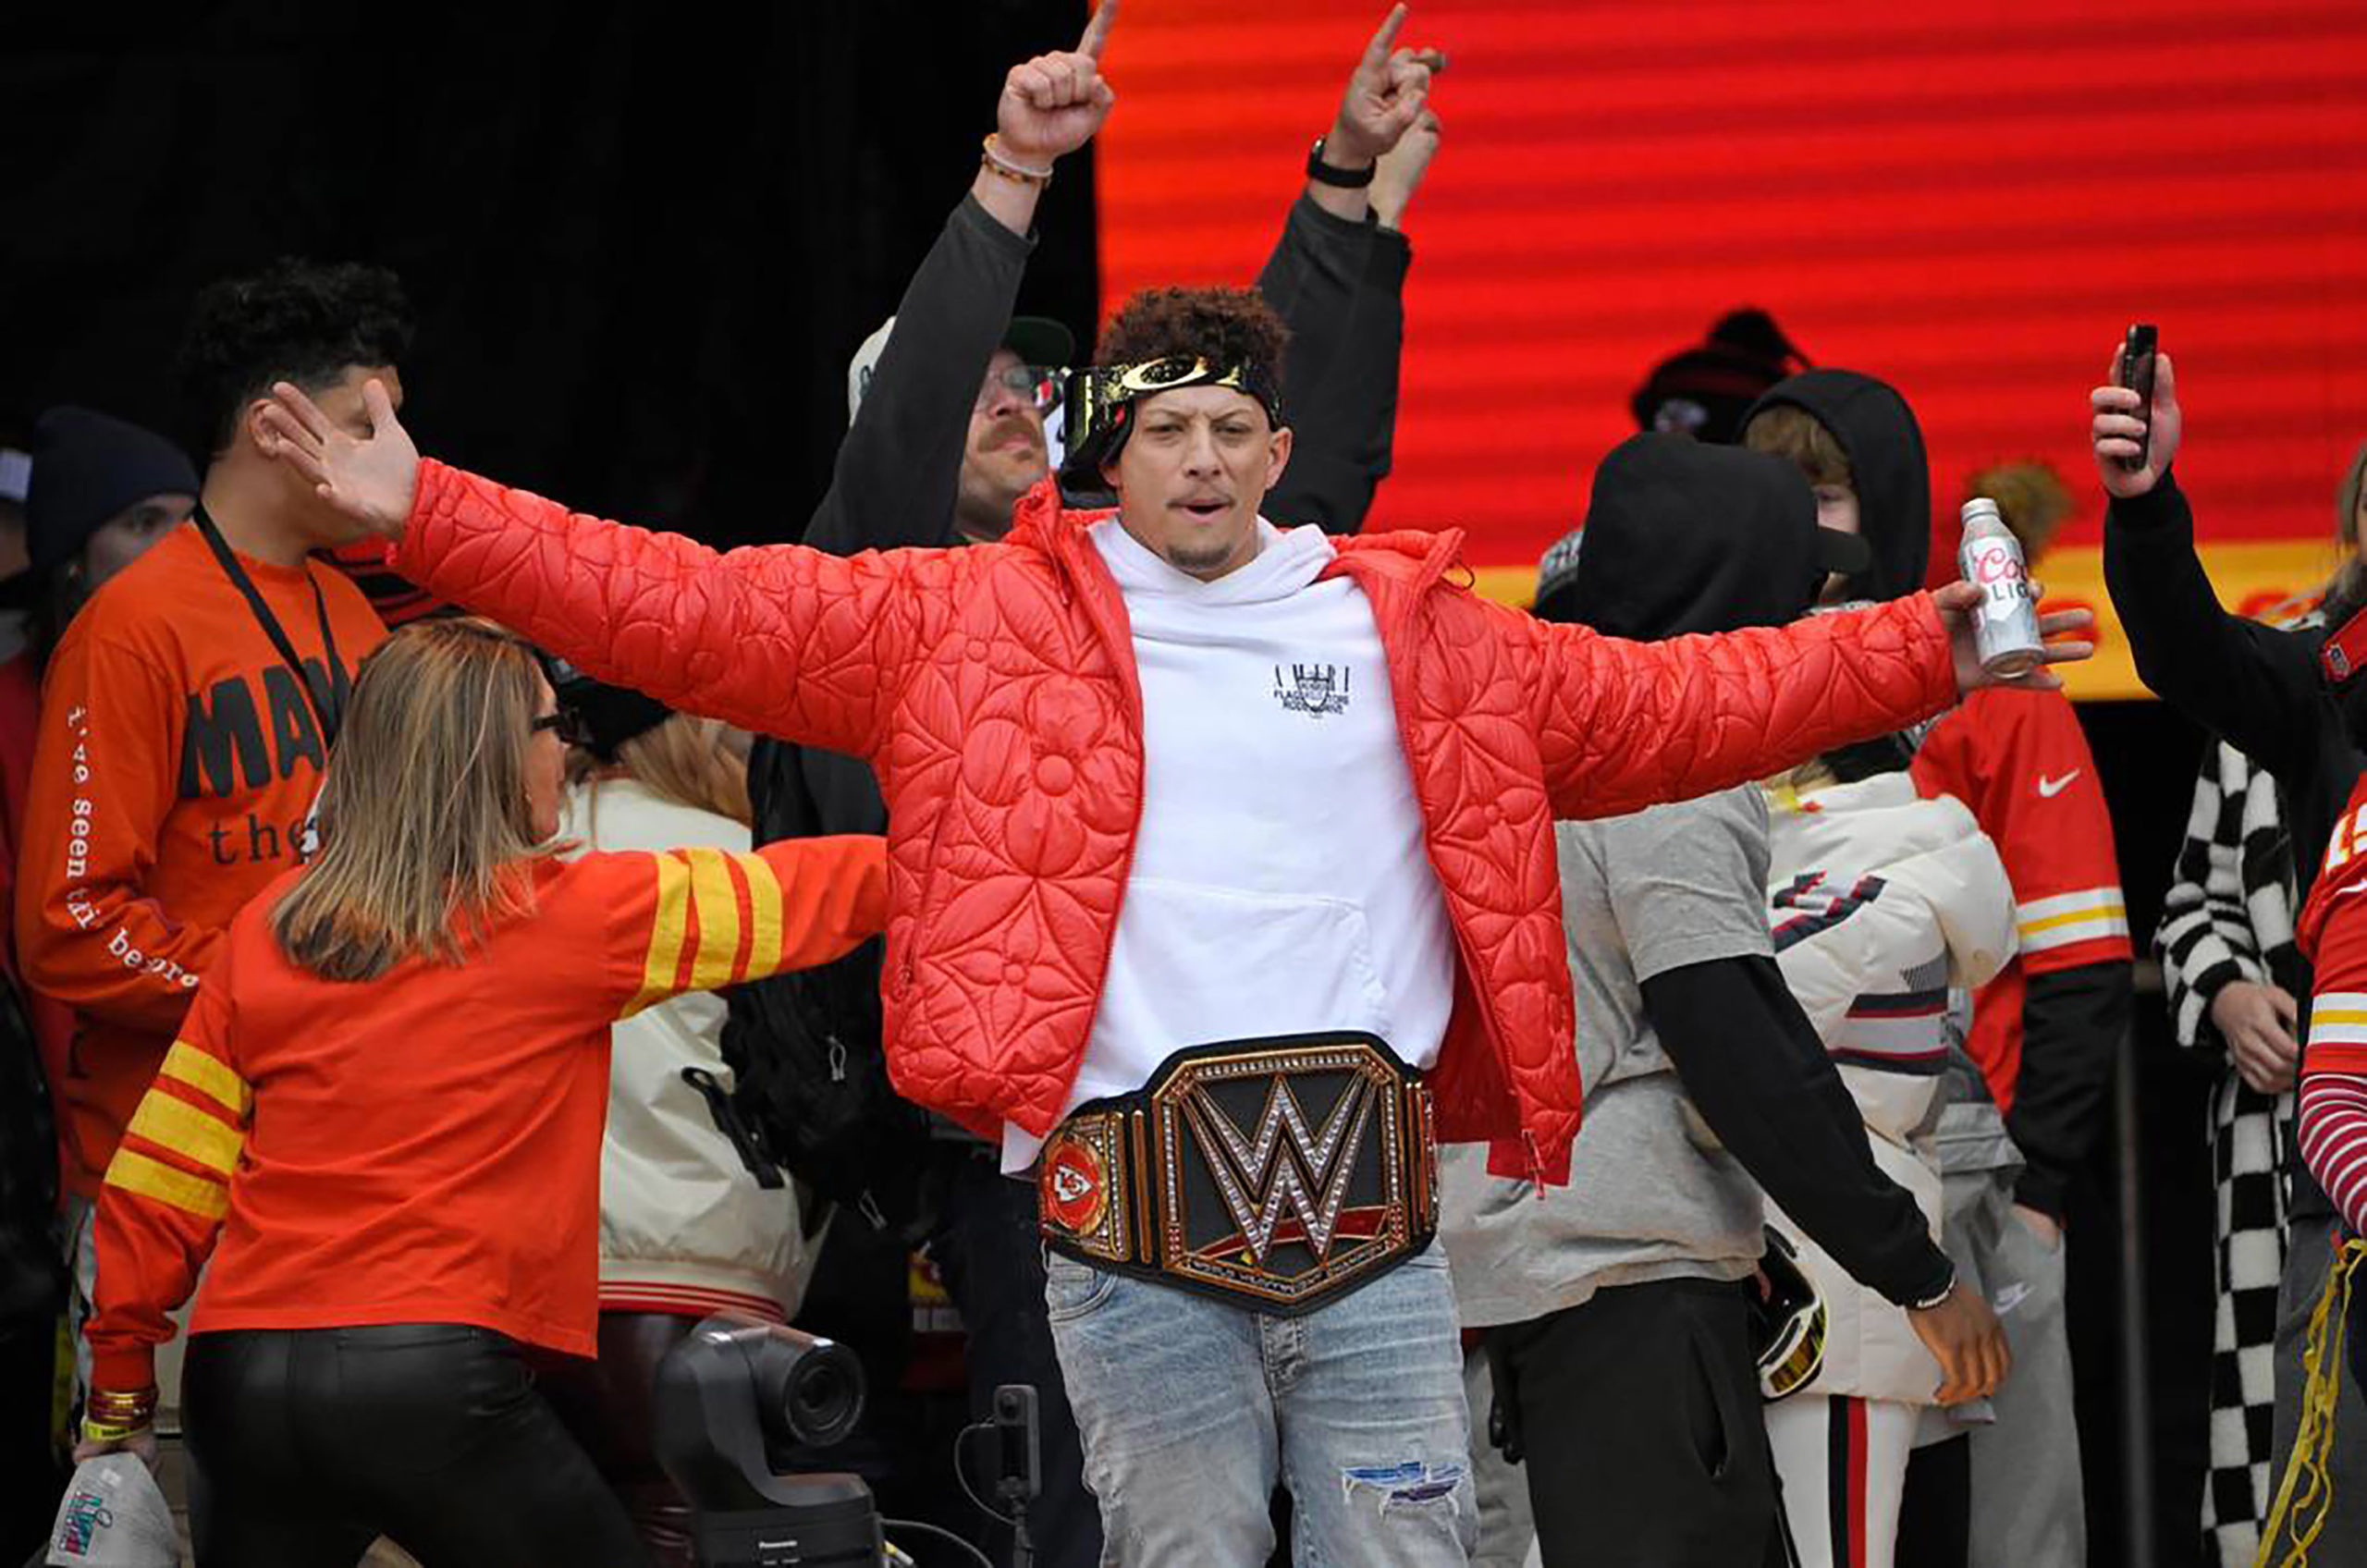 Kansas City Chiefs quarterback Patrick Mahomes fired up the crowd on stage in front of Union Station during the Kansas City Chiefs Super Bowl LVII victory parade Wednesday, Feb. 15, 2023, in downtown Kansas City. (Tammy Ljungblad/The Kansas City Star/Tribune News Service via Getty Images)